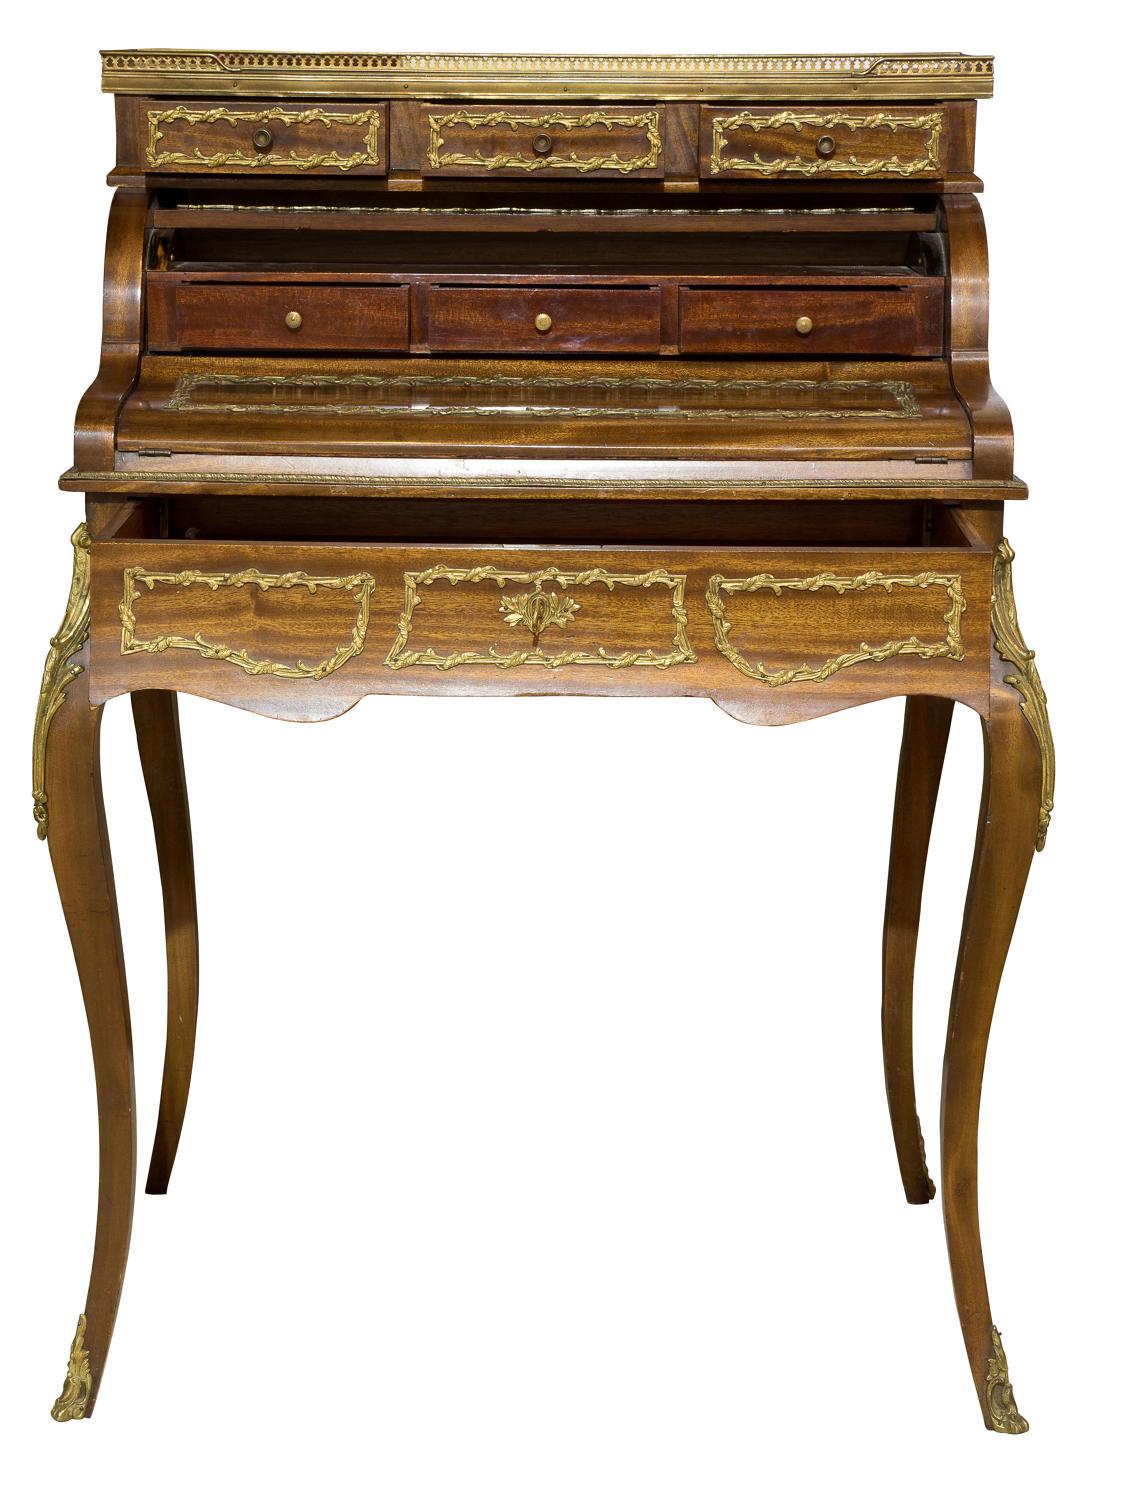 Louis XVI style vernis-martin bonheur du jour comprising 3 drawers over the decorated cylinder fall standing on cabriole legs with ormolu mounts throughout.

circa 1930.